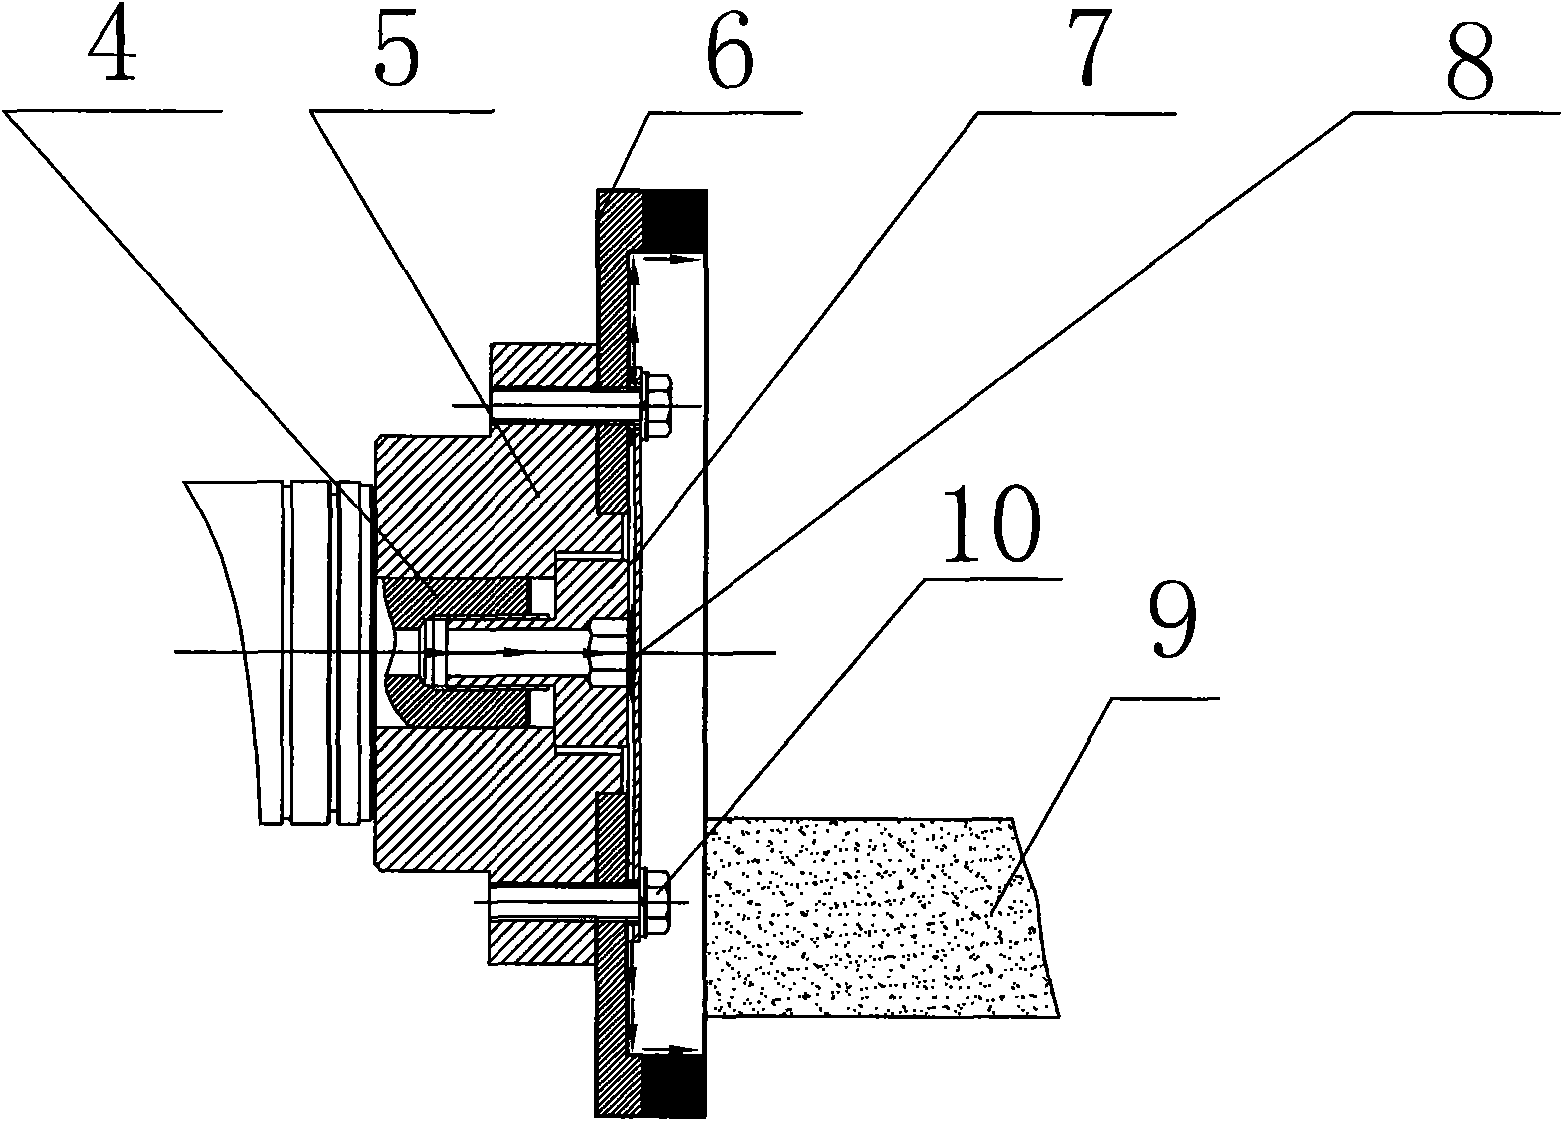 Cooling water supply device for glass edging machine